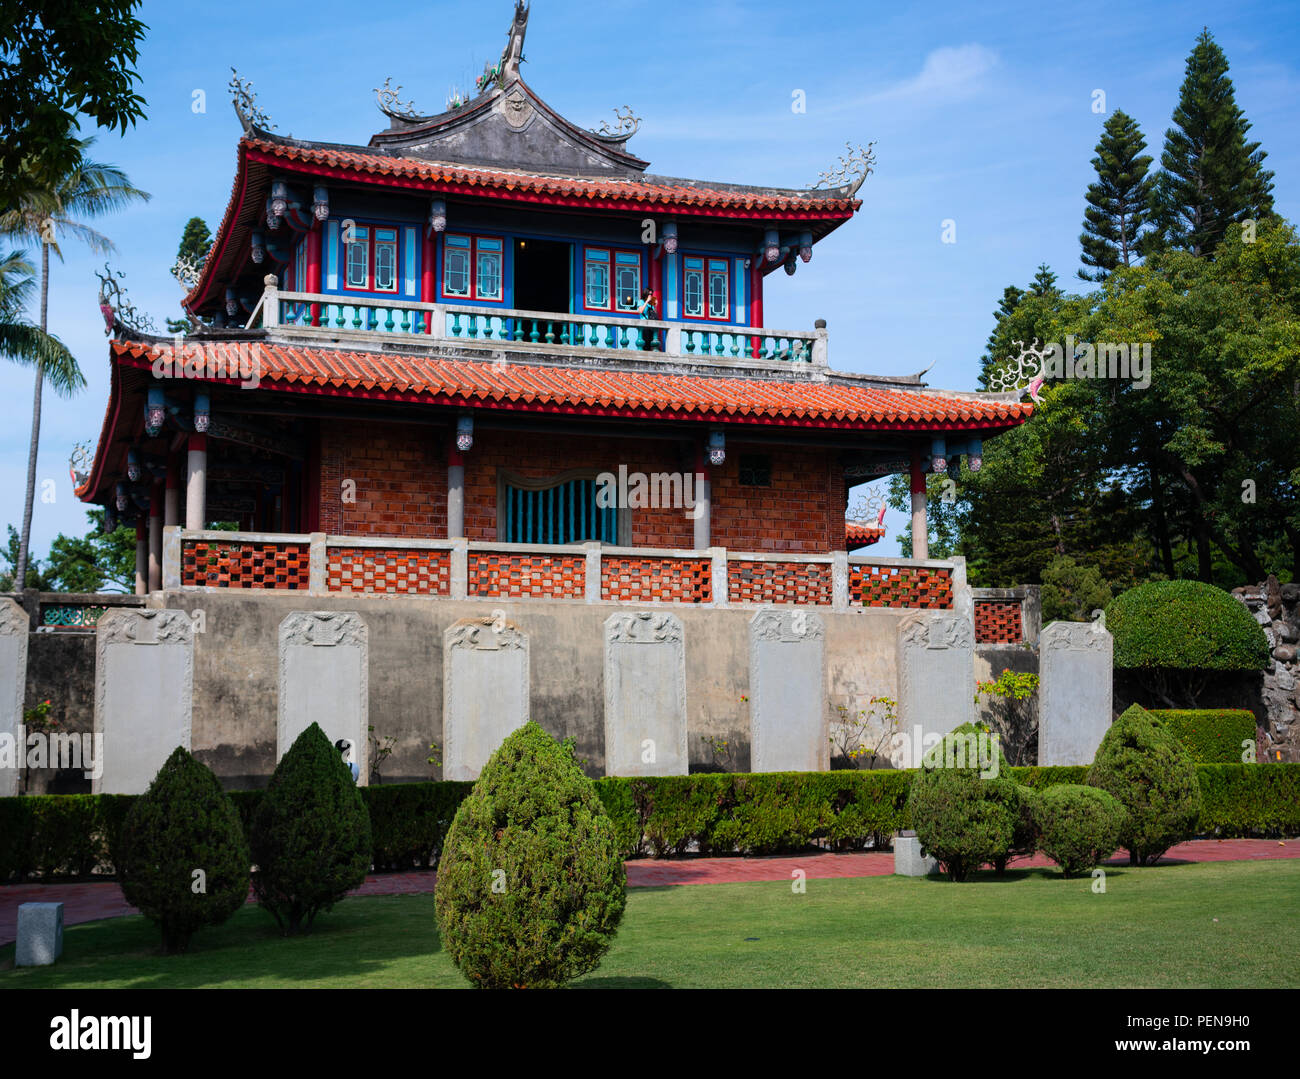 View of old Chihkan Tower landmark at Fort provincia in Tainan Taiwan Stock Photo